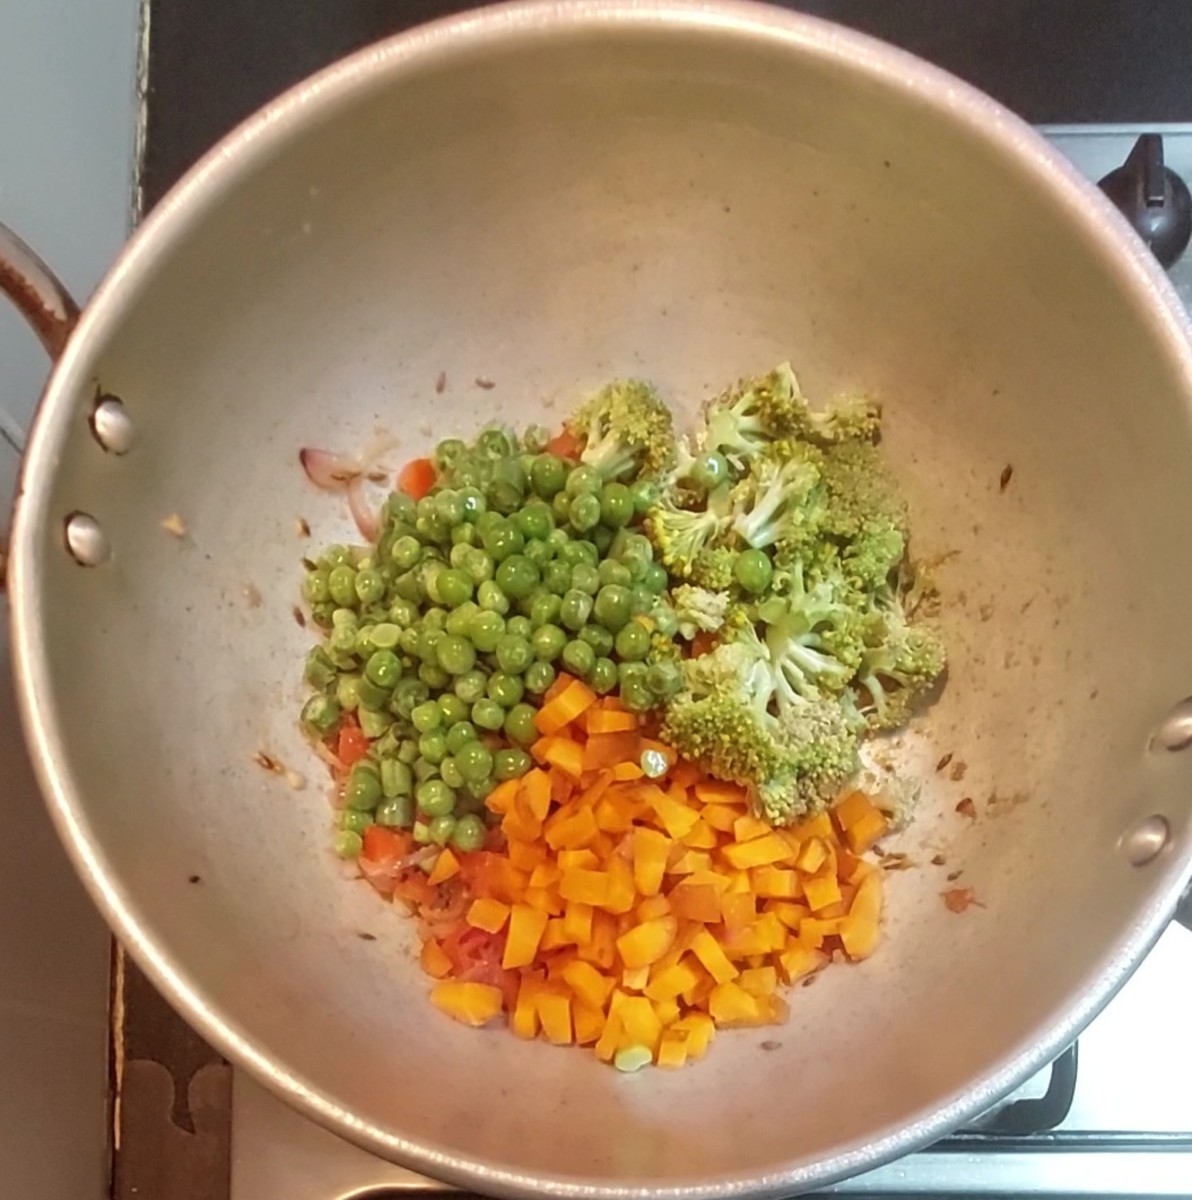 Add 1/4 cup chopped french beans, 1/2 cup carrots, 7-8 florets broccoli (soaked in hot water for 10 minutes), 1/4 cup frozen peas, fry for a minute. Add salt to taste.